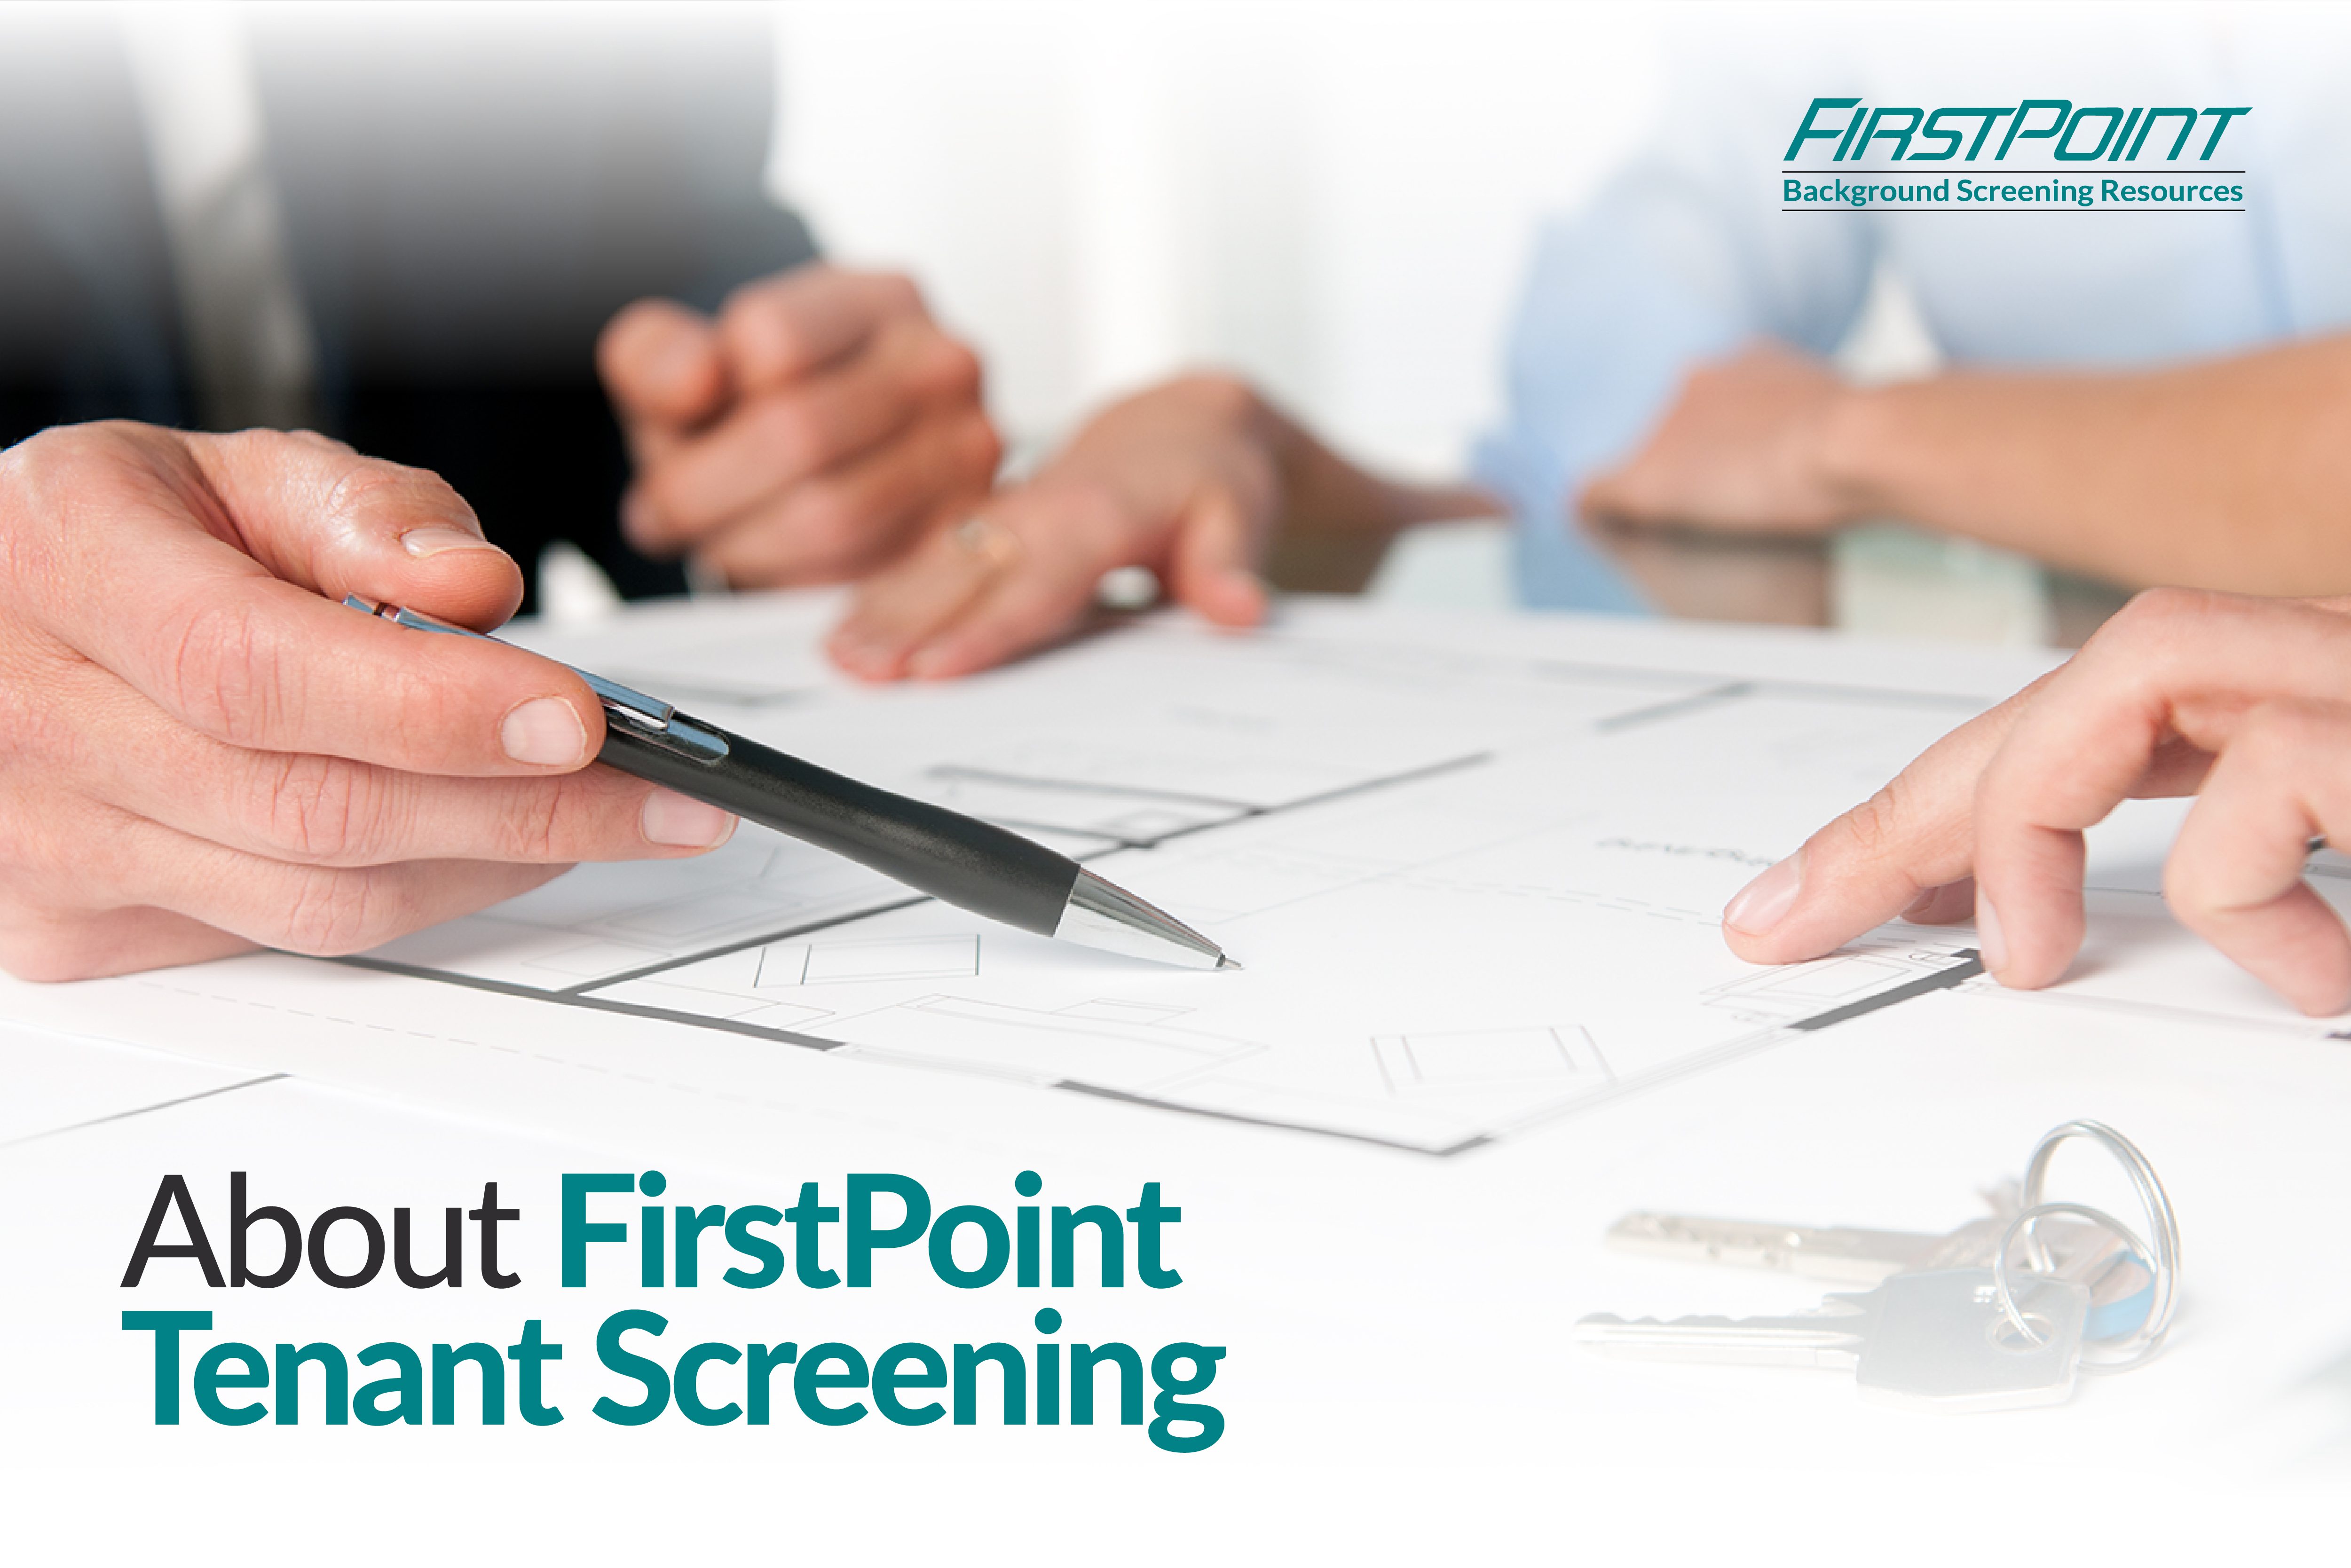 About FirstPoint Background Screening